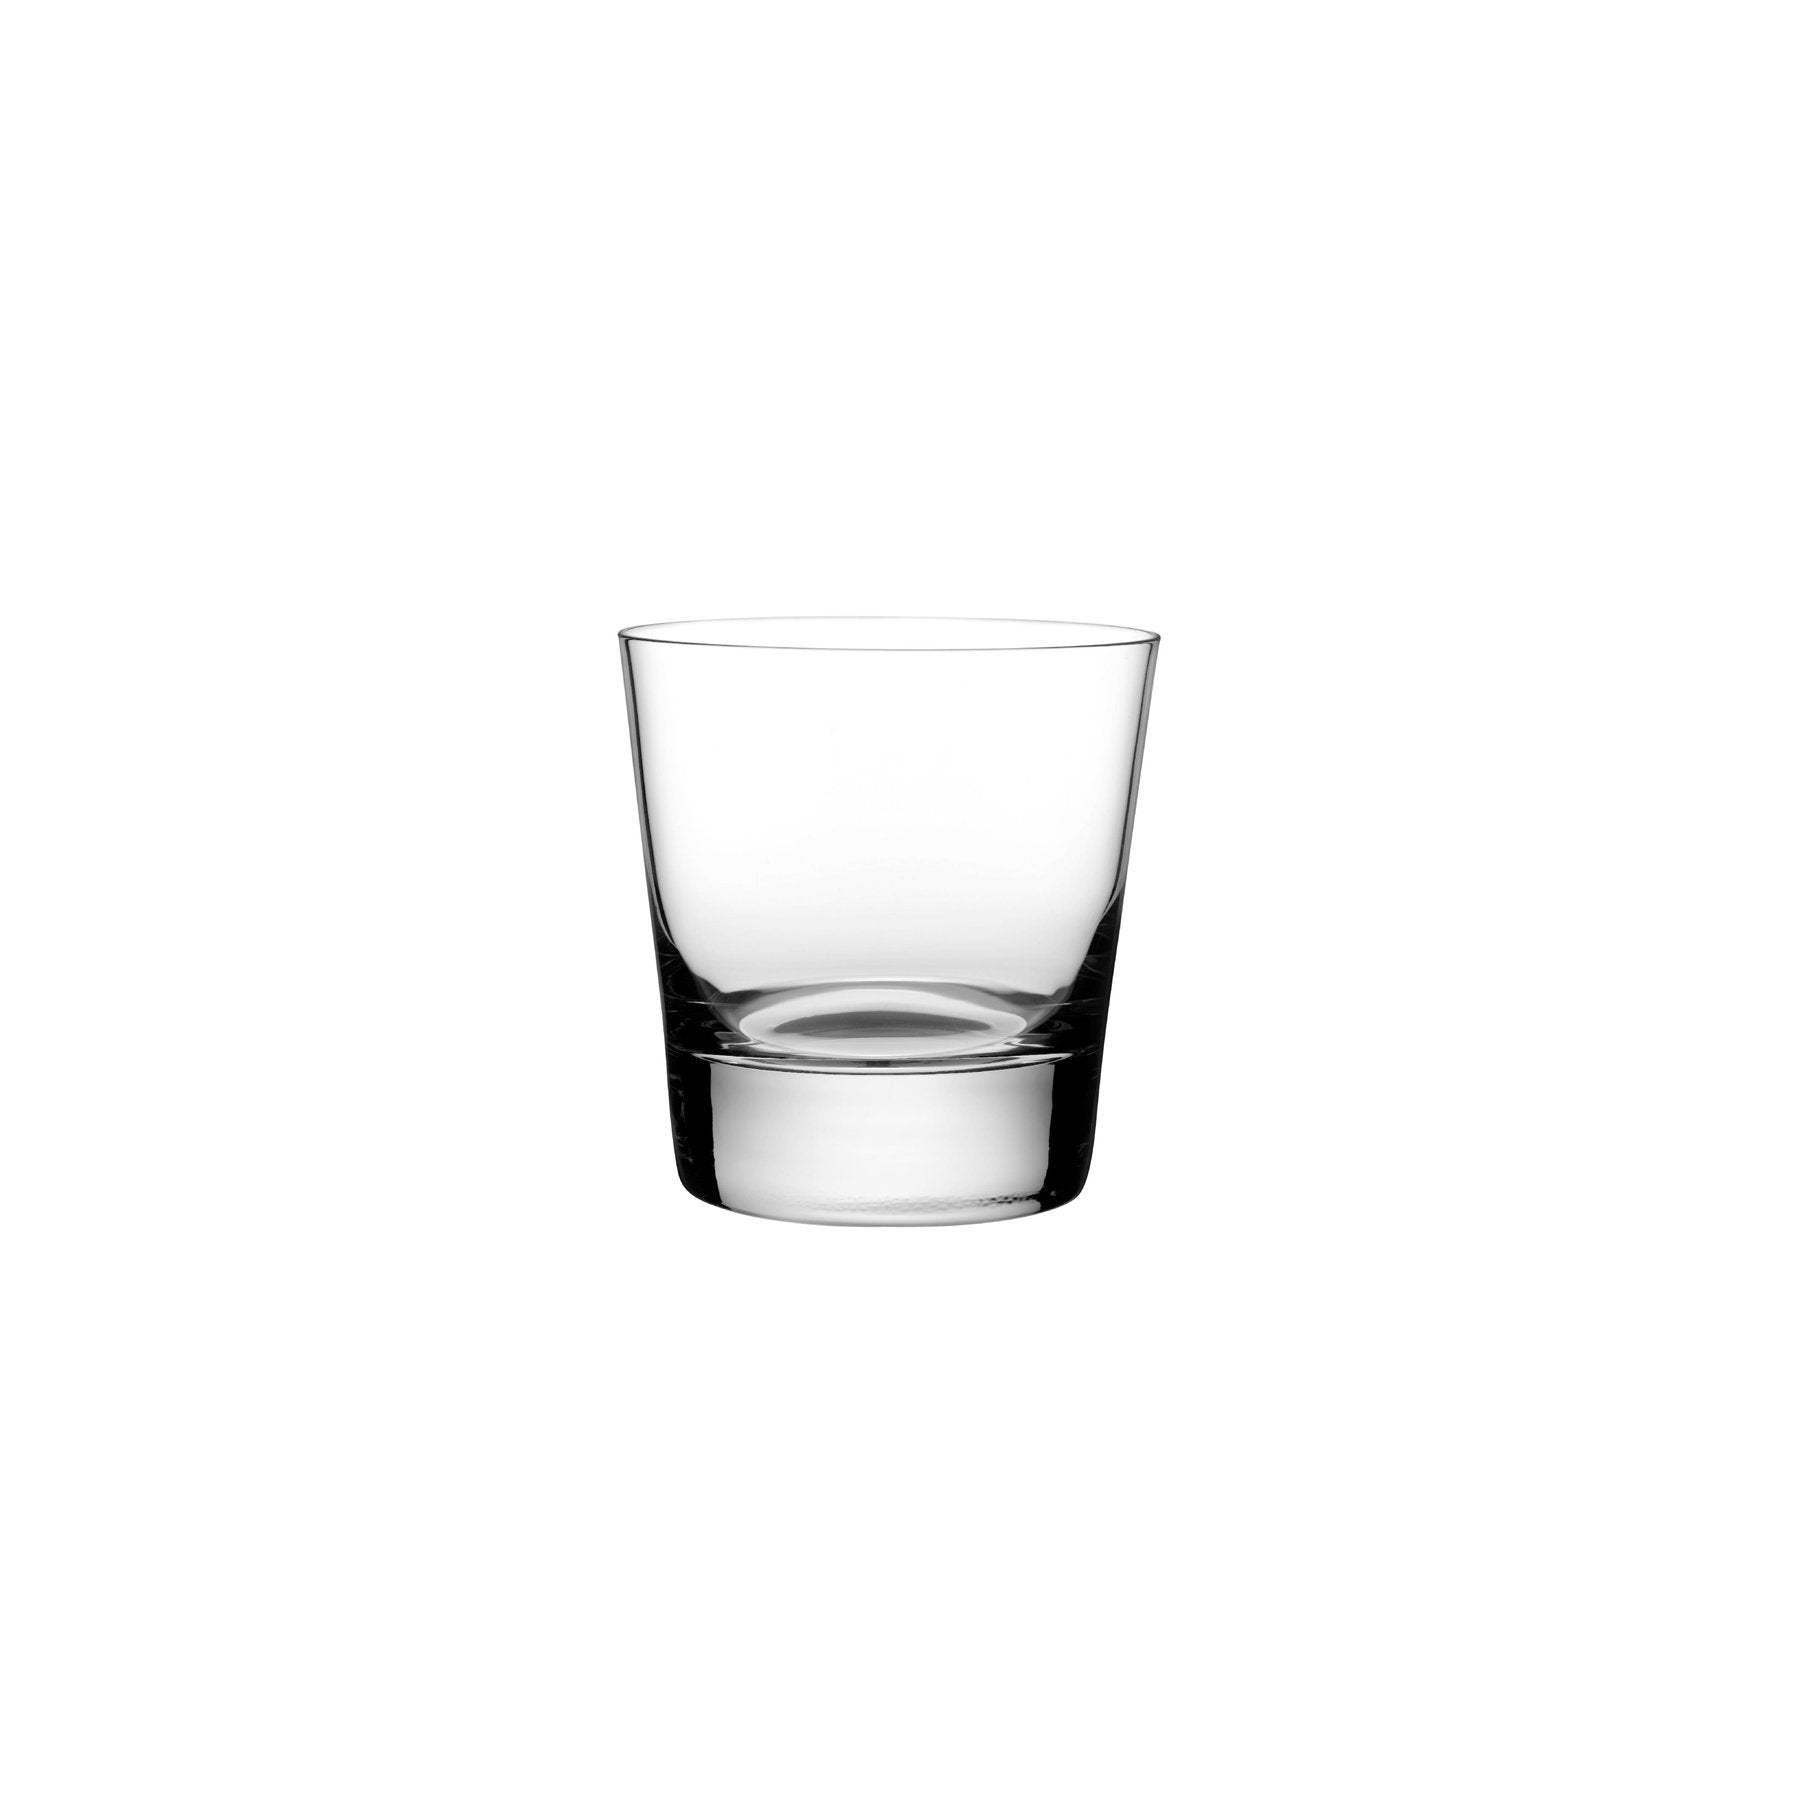 Nude Glass Caldera Crystal Double Old Fashioned Whiskey Rocks Glasses - 11  oz - Set of 4